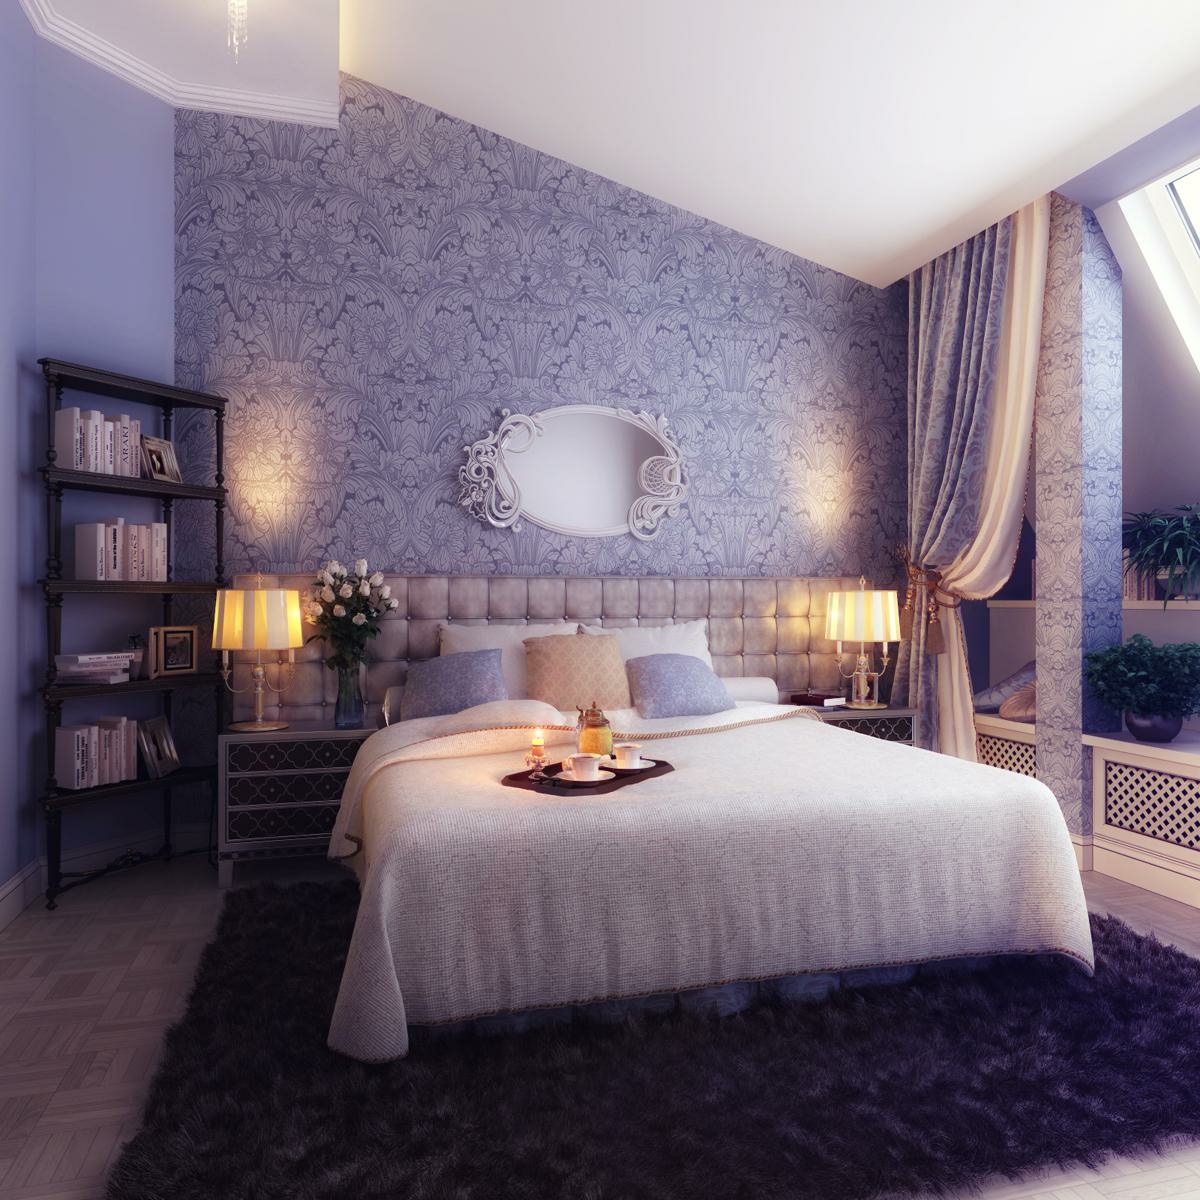 Classic bedroom themes "width =" 1200 "height =" 1200 "srcset =" https://mileray.com/wp-content/uploads/2020/05/1588511325_1_13-Classic-Bedroom-Themes-For-Small-Rooms.jpg 1200w, https: // myfashionos. com / wp-content / uploads / 2016/05 / Happy-Irena-1-150x150.jpg 150w, https://mileray.com/wp-content/uploads/2016/05/Happy-Irena-1-300x300.jpg 300w, https://mileray.com/wp-content/uploads/2016/05/Happy-Irena-1-768x768.jpg 768w, https://mileray.com/wp-content/uploads/2016/05/Happy -Irena-1-1024x1024.jpg 1024w, https://mileray.com/wp-content/uploads/2016/05/Happy-Irena-1-696x696.jpg 696w, https://mileray.com/wp-content /uploads/2016/05/Happy-Irena-1-1068x1068.jpg 1068w, https://mileray.com/wp-content/uploads/2016/05/Happy-Irena-1-420x420.jpg 420w "Sizes =" (maximum width: 1200px) 100vw, 1200px